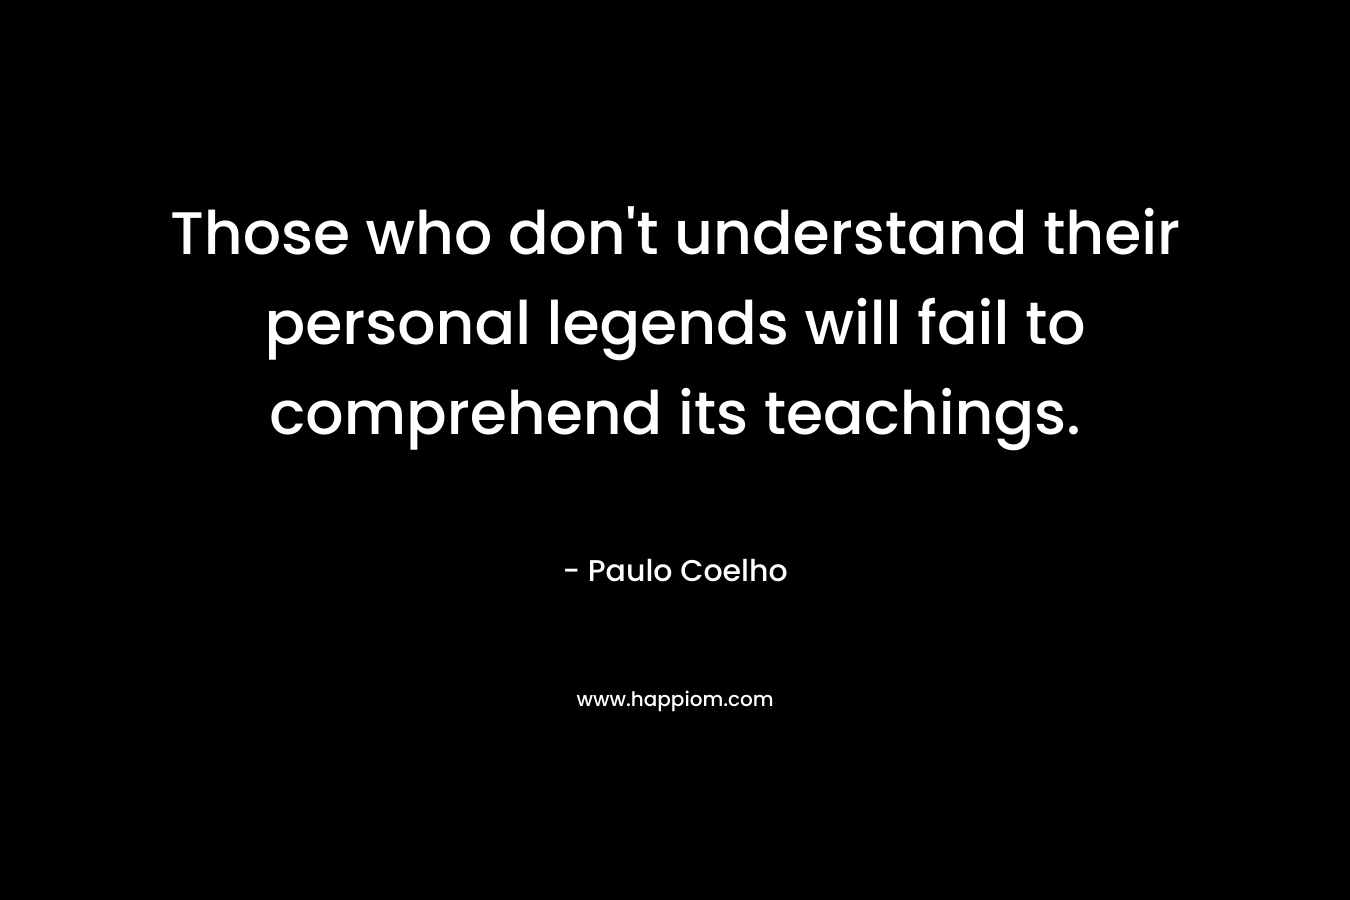 Those who don't understand their personal legends will fail to comprehend its teachings.